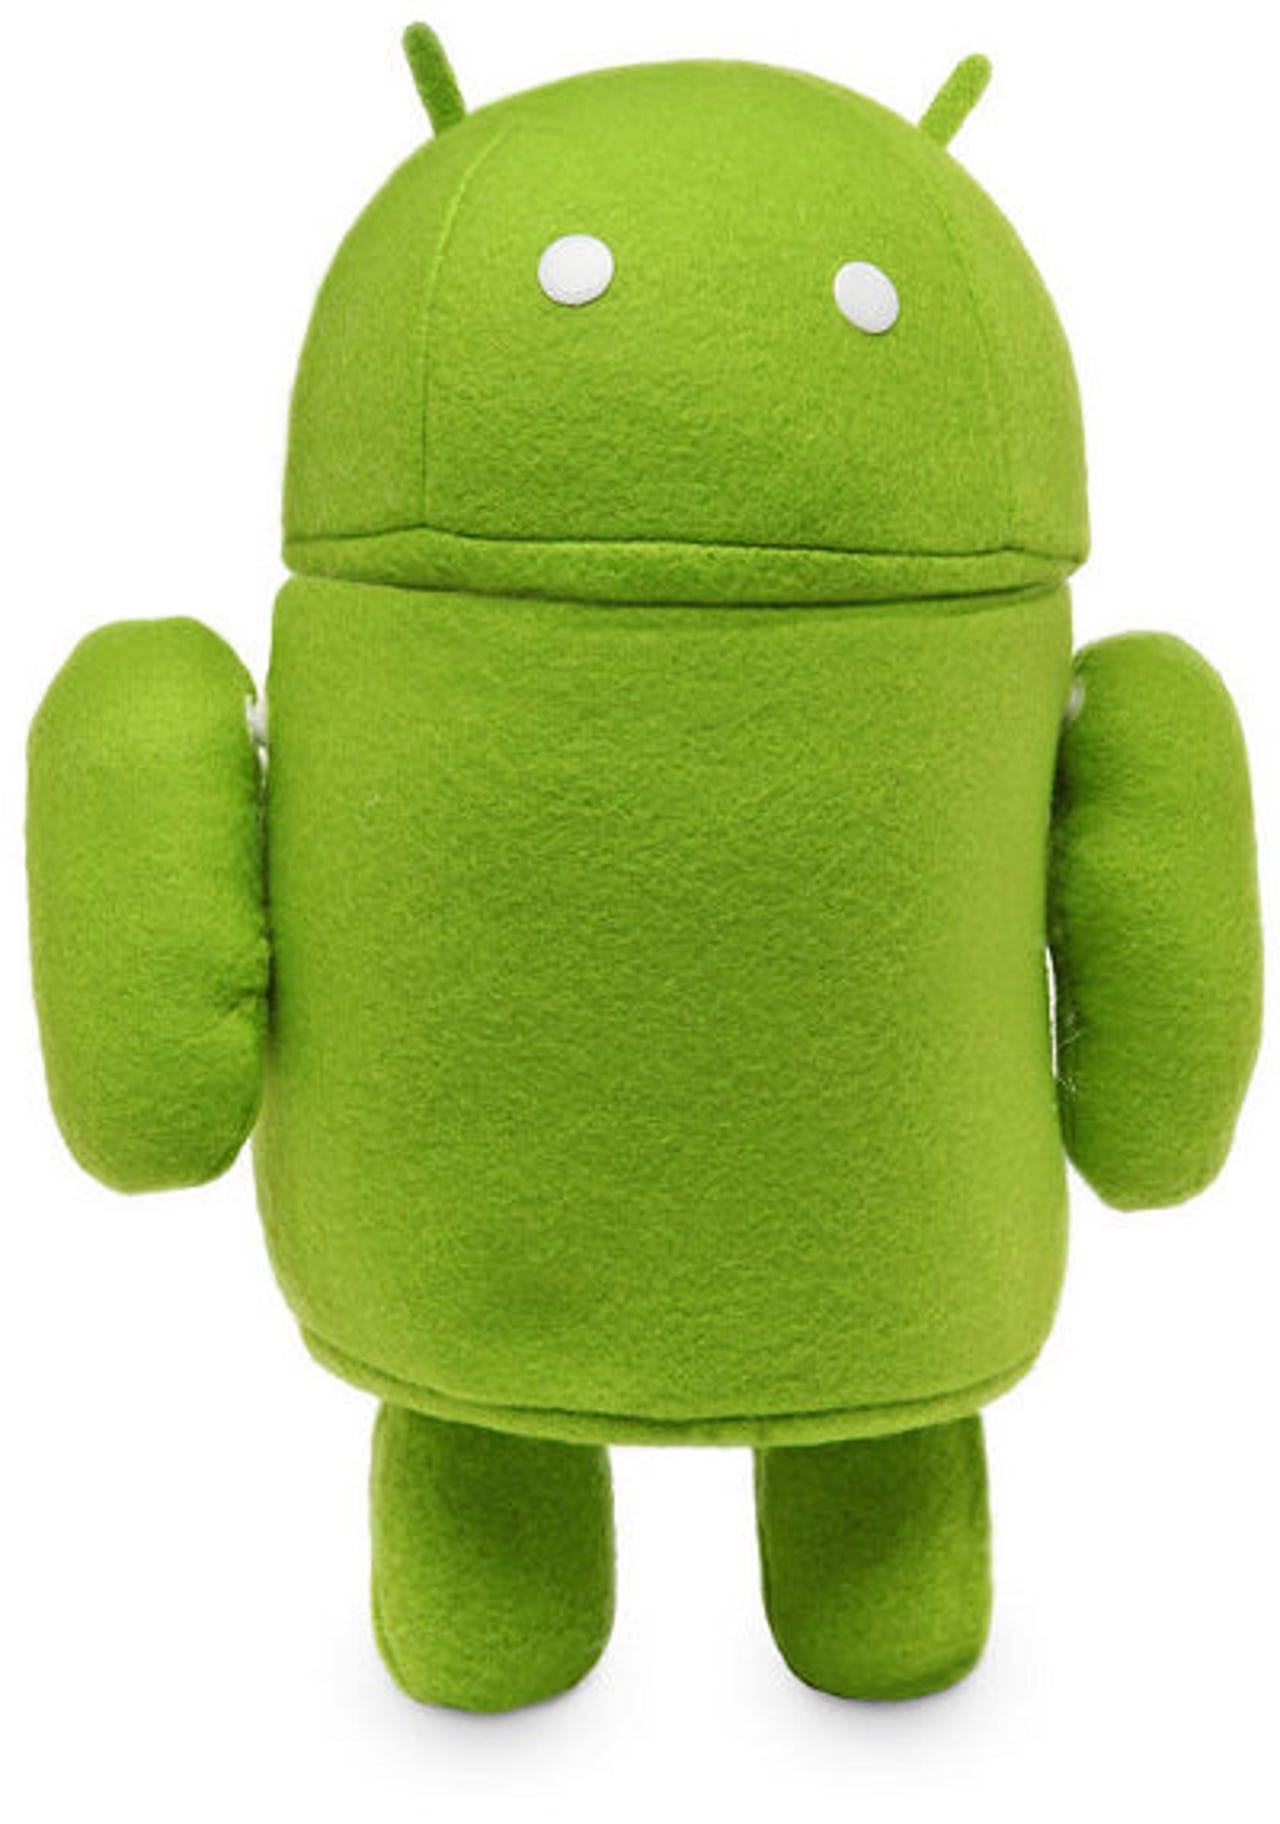 40153921-7-android-toy.jpg